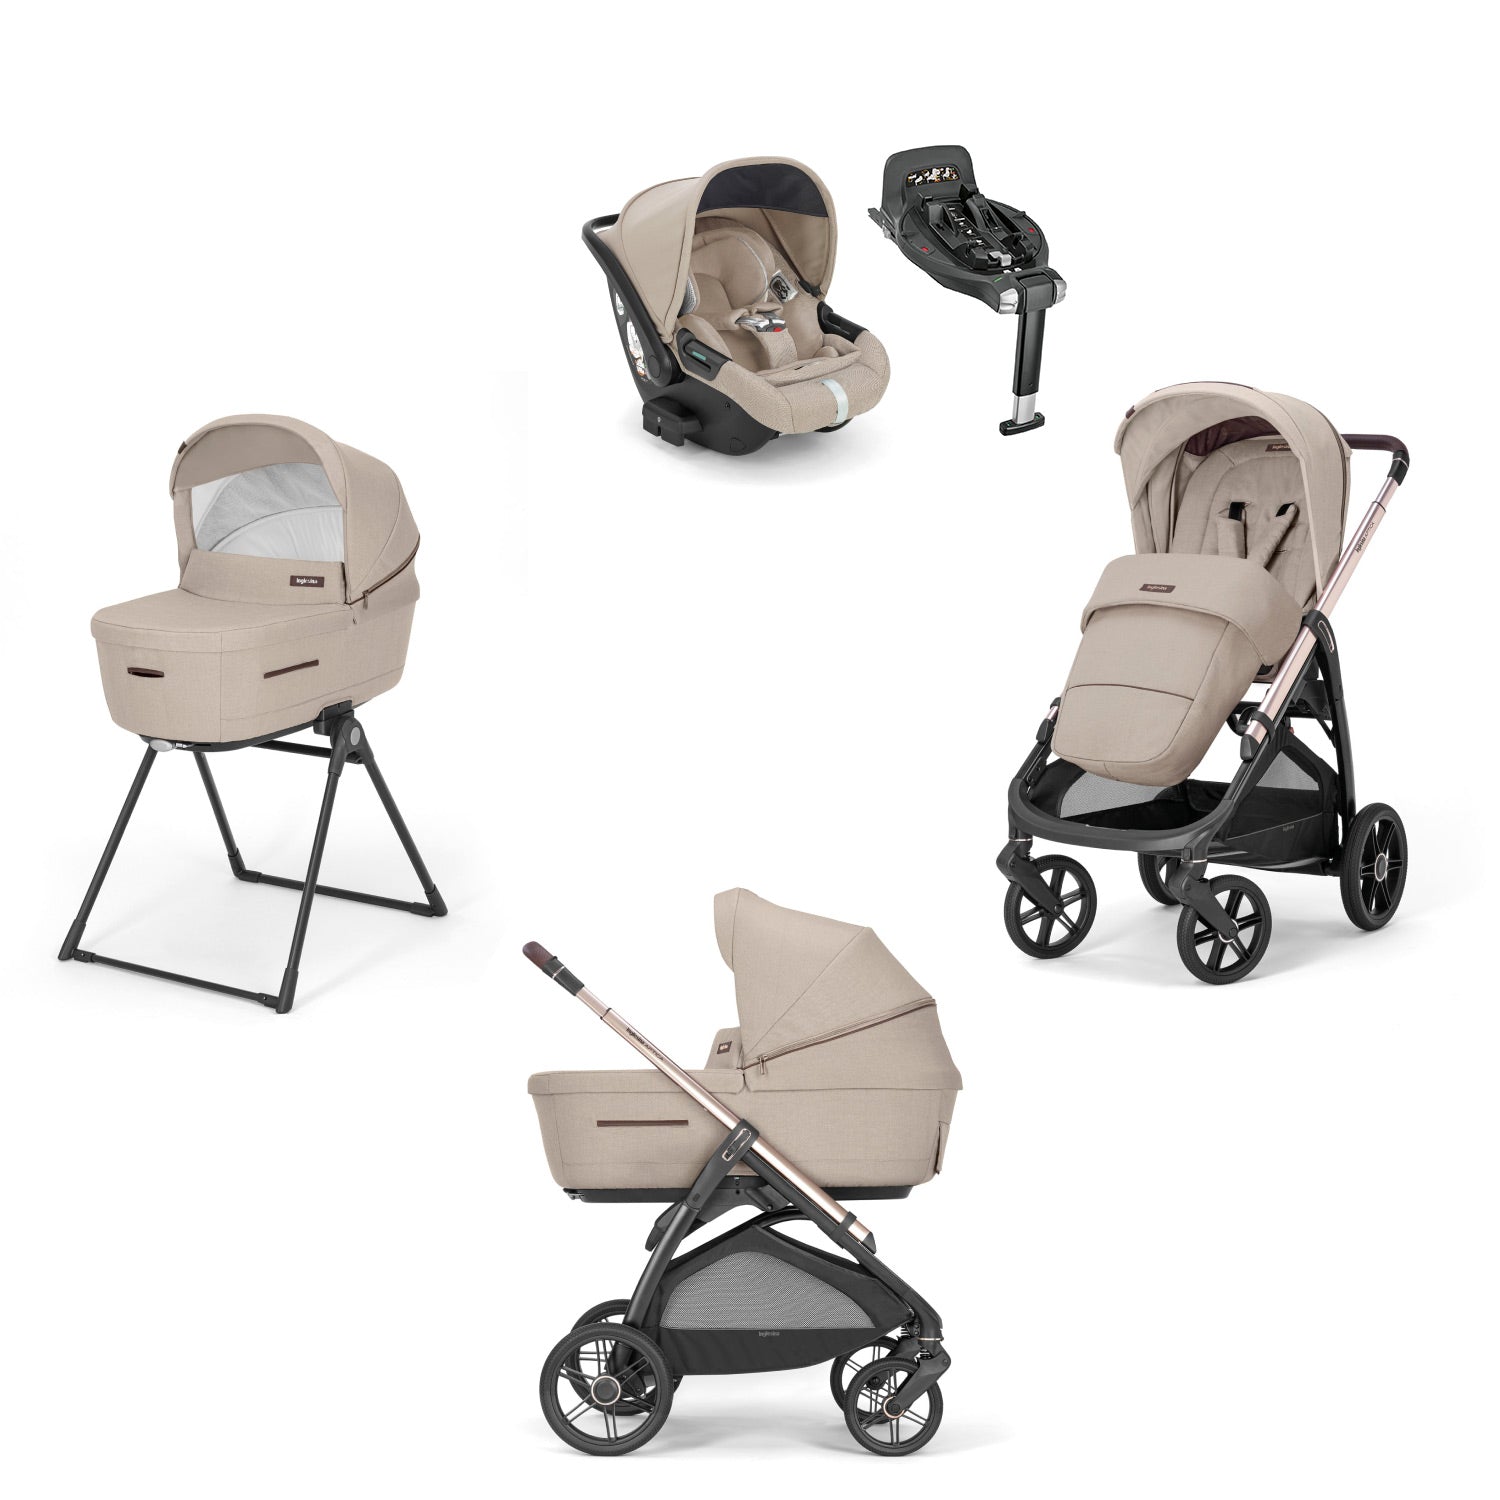 Image of Aptica System Quattro Color Pashmina Beige Chassis Palladio car Seat Darwin Infant Recline and 360° I-size Base